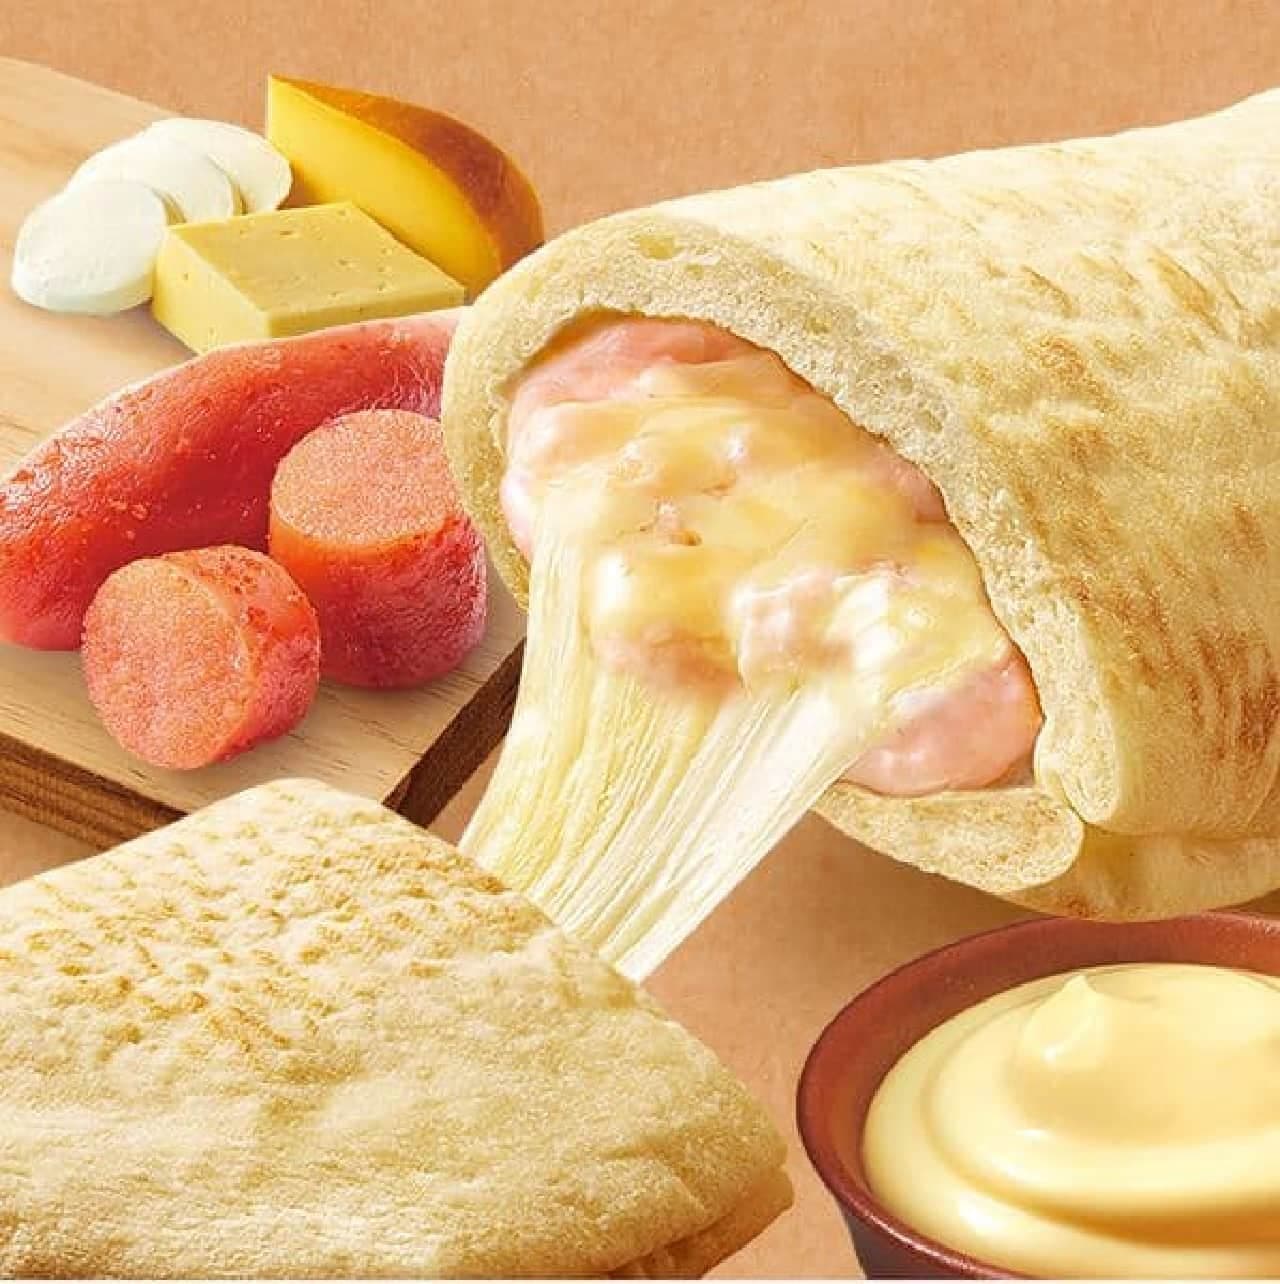 FamilyMart "Pizza Sandwich Motto Mentaiko & 3 kinds of cheese".